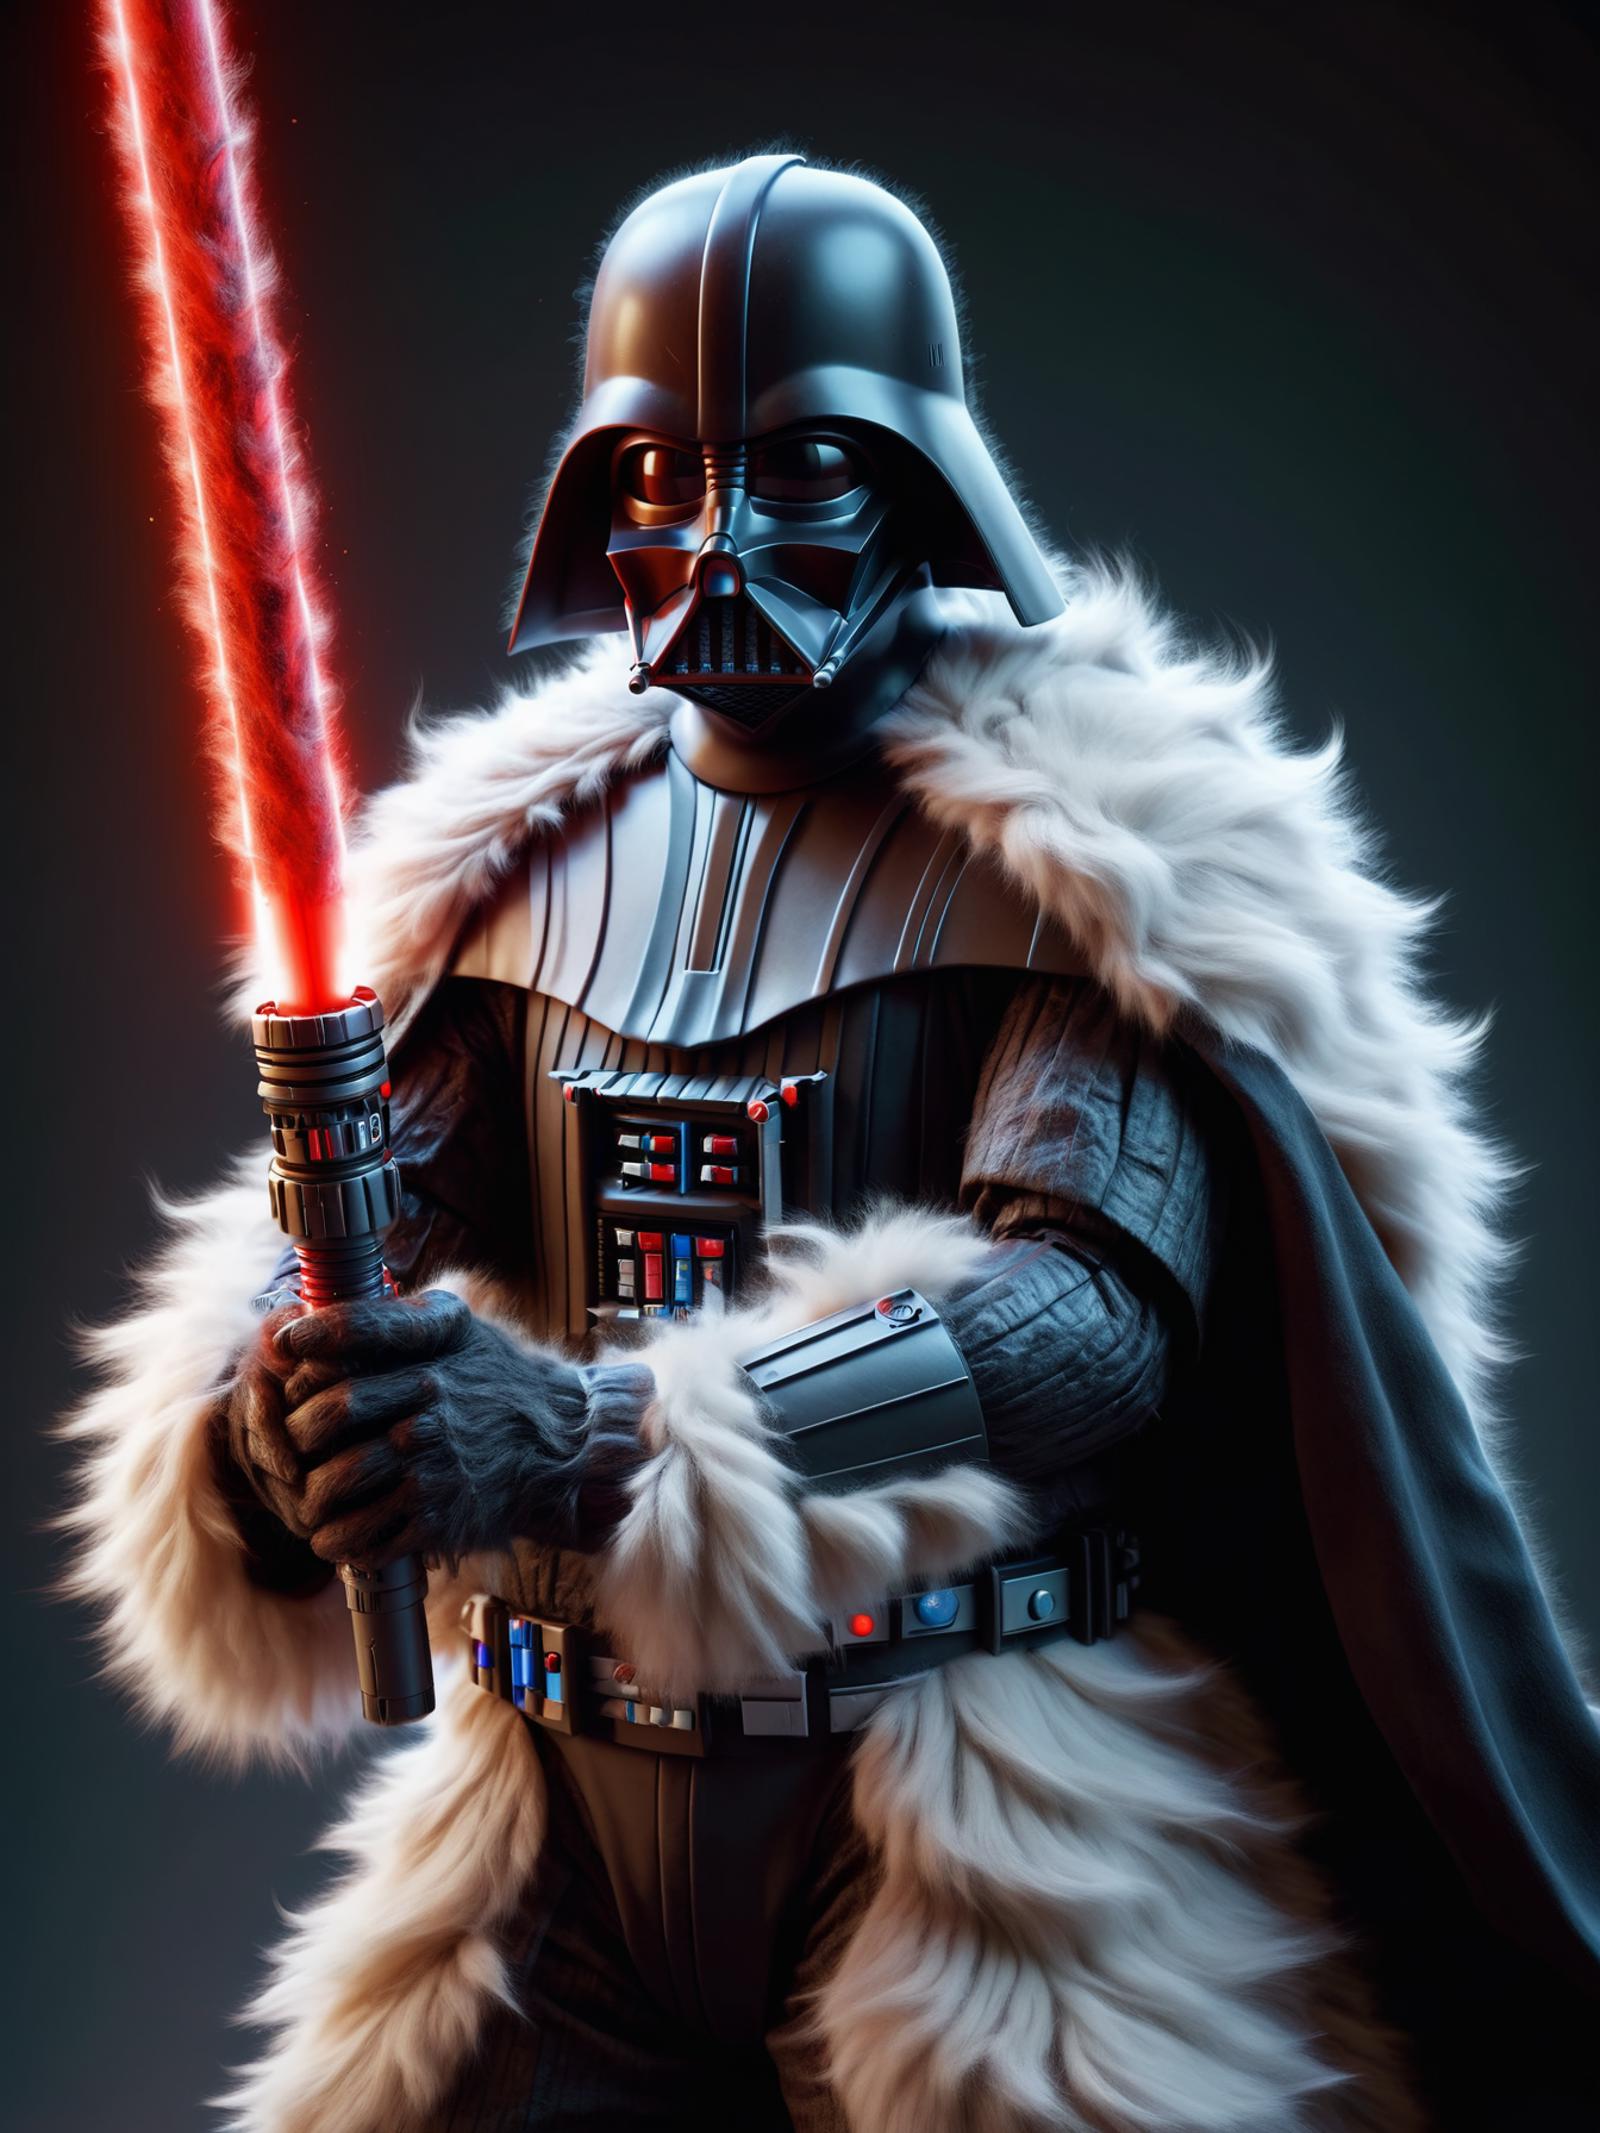 Darth Vader in a Fur Coat and Red Lightsaber